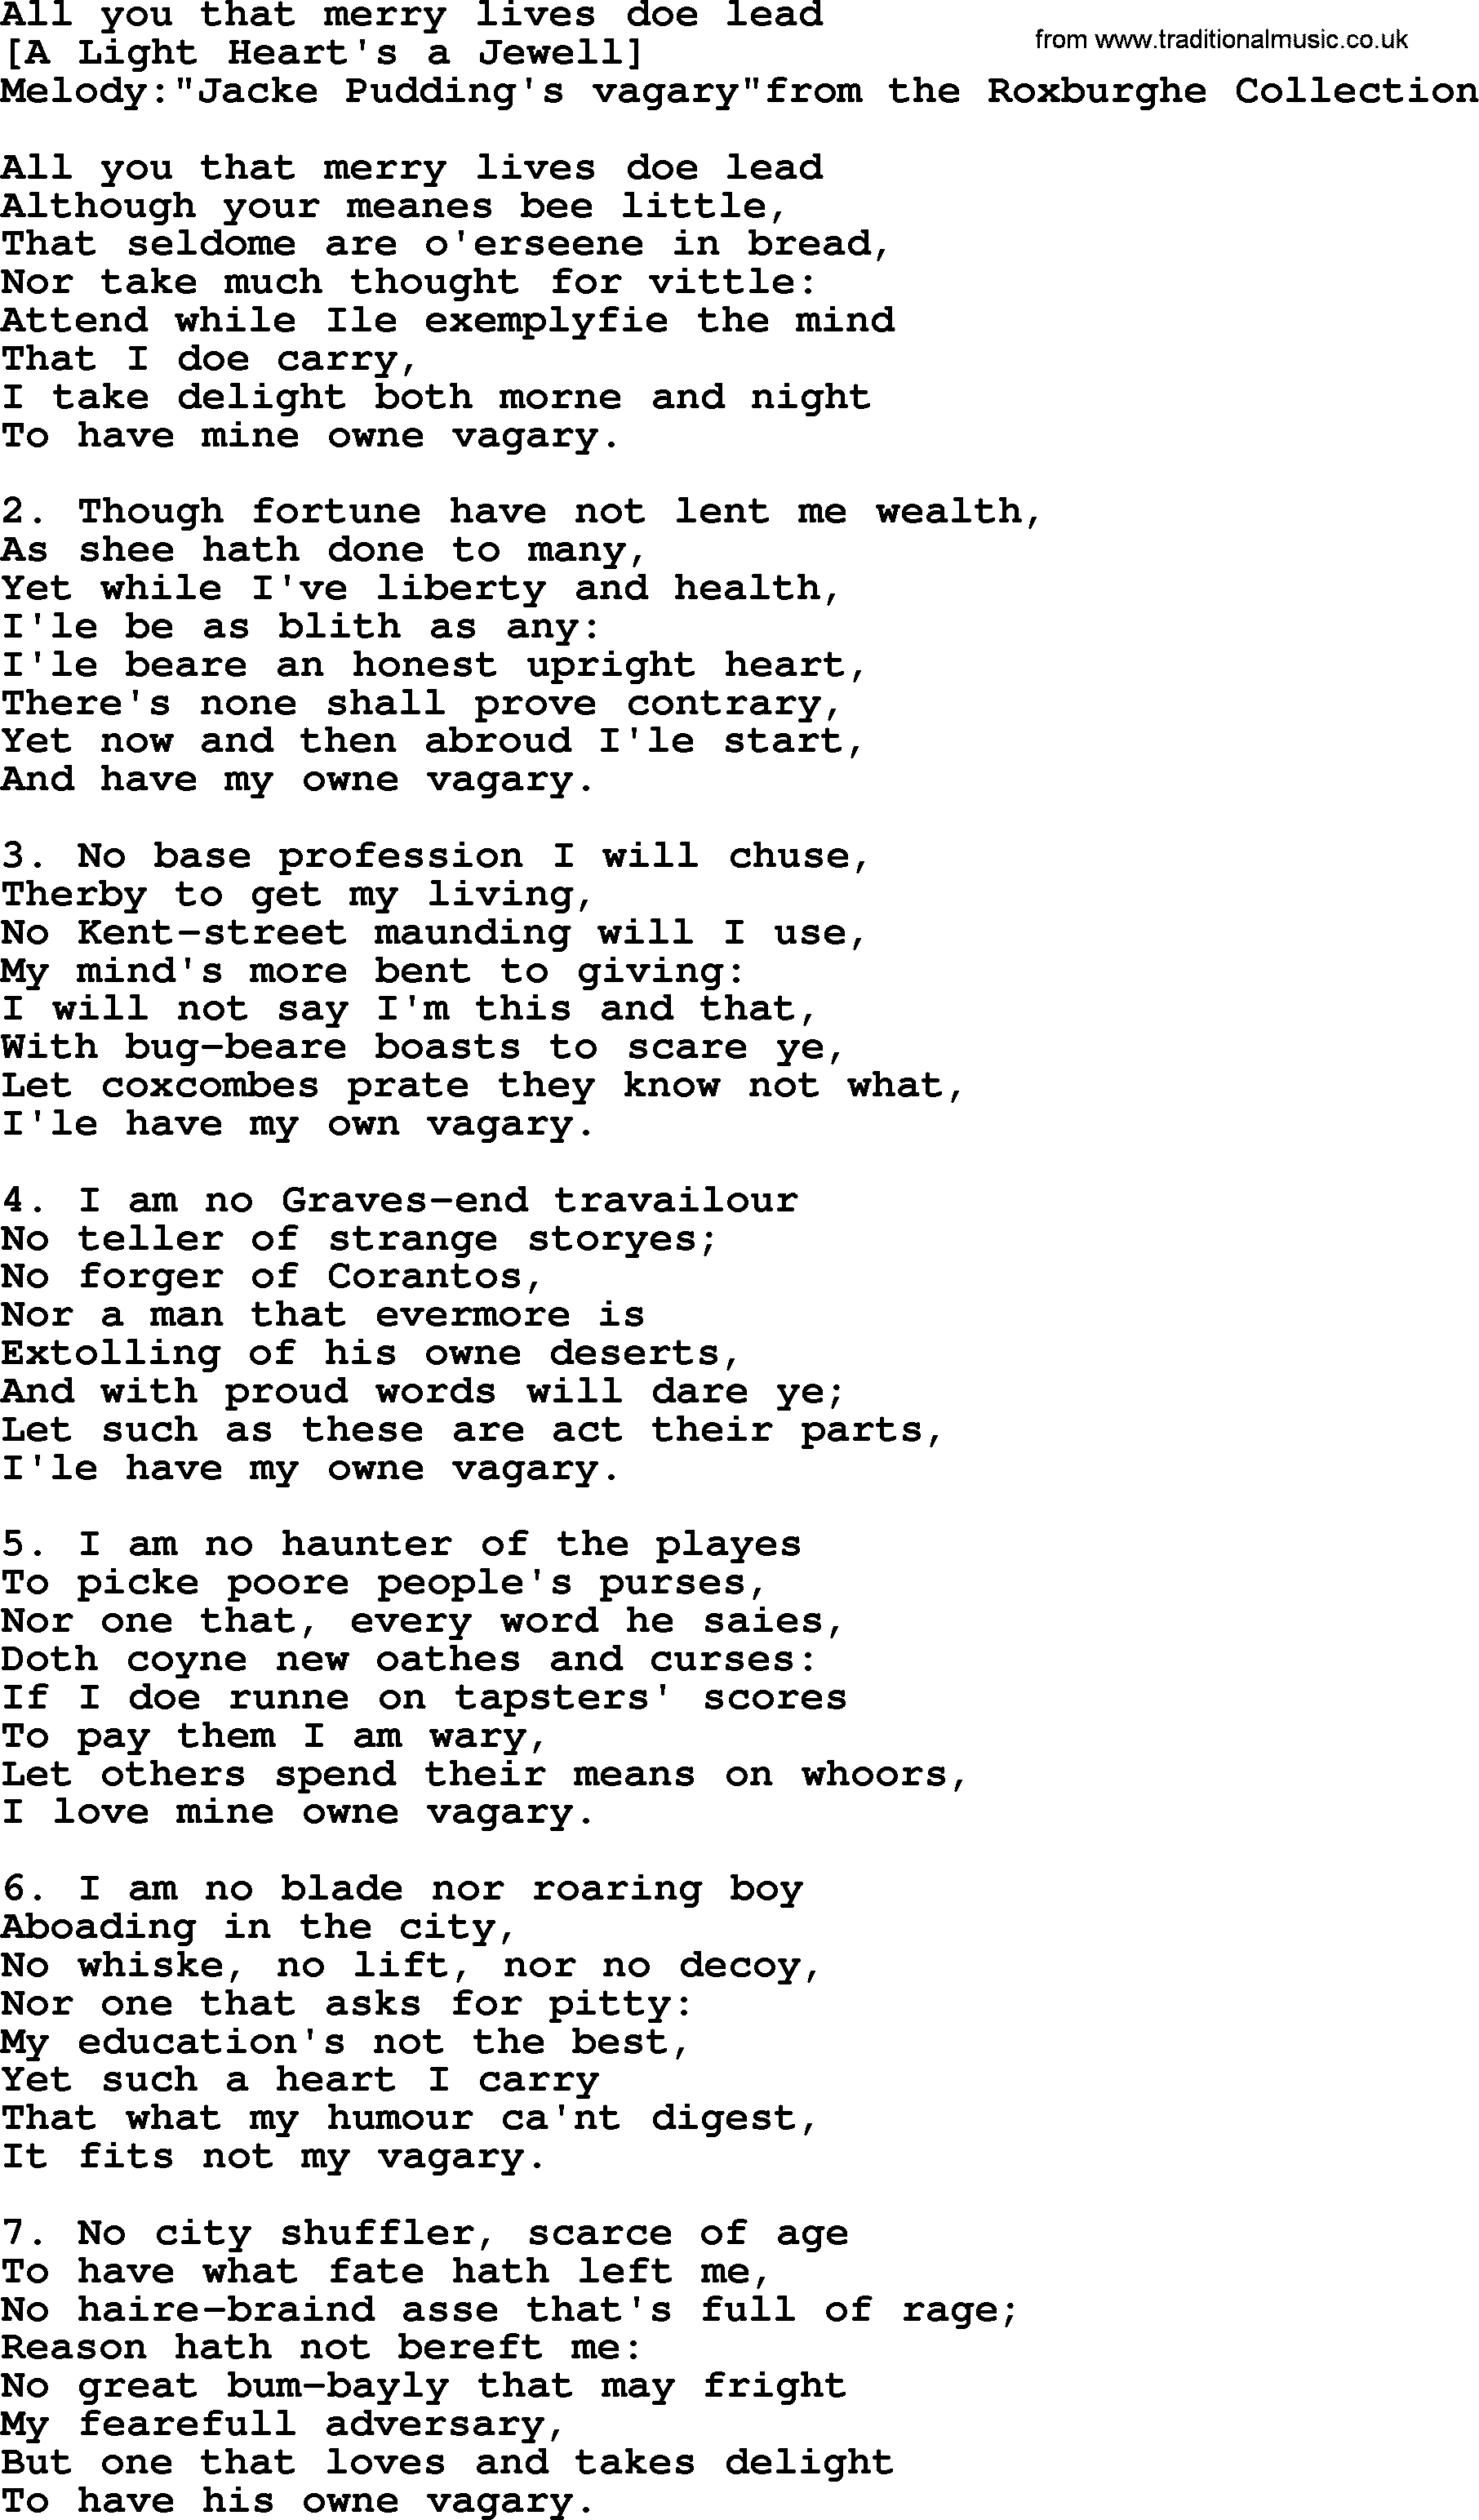 Old English Song: All You That Merry Lives Doe Lead lyrics